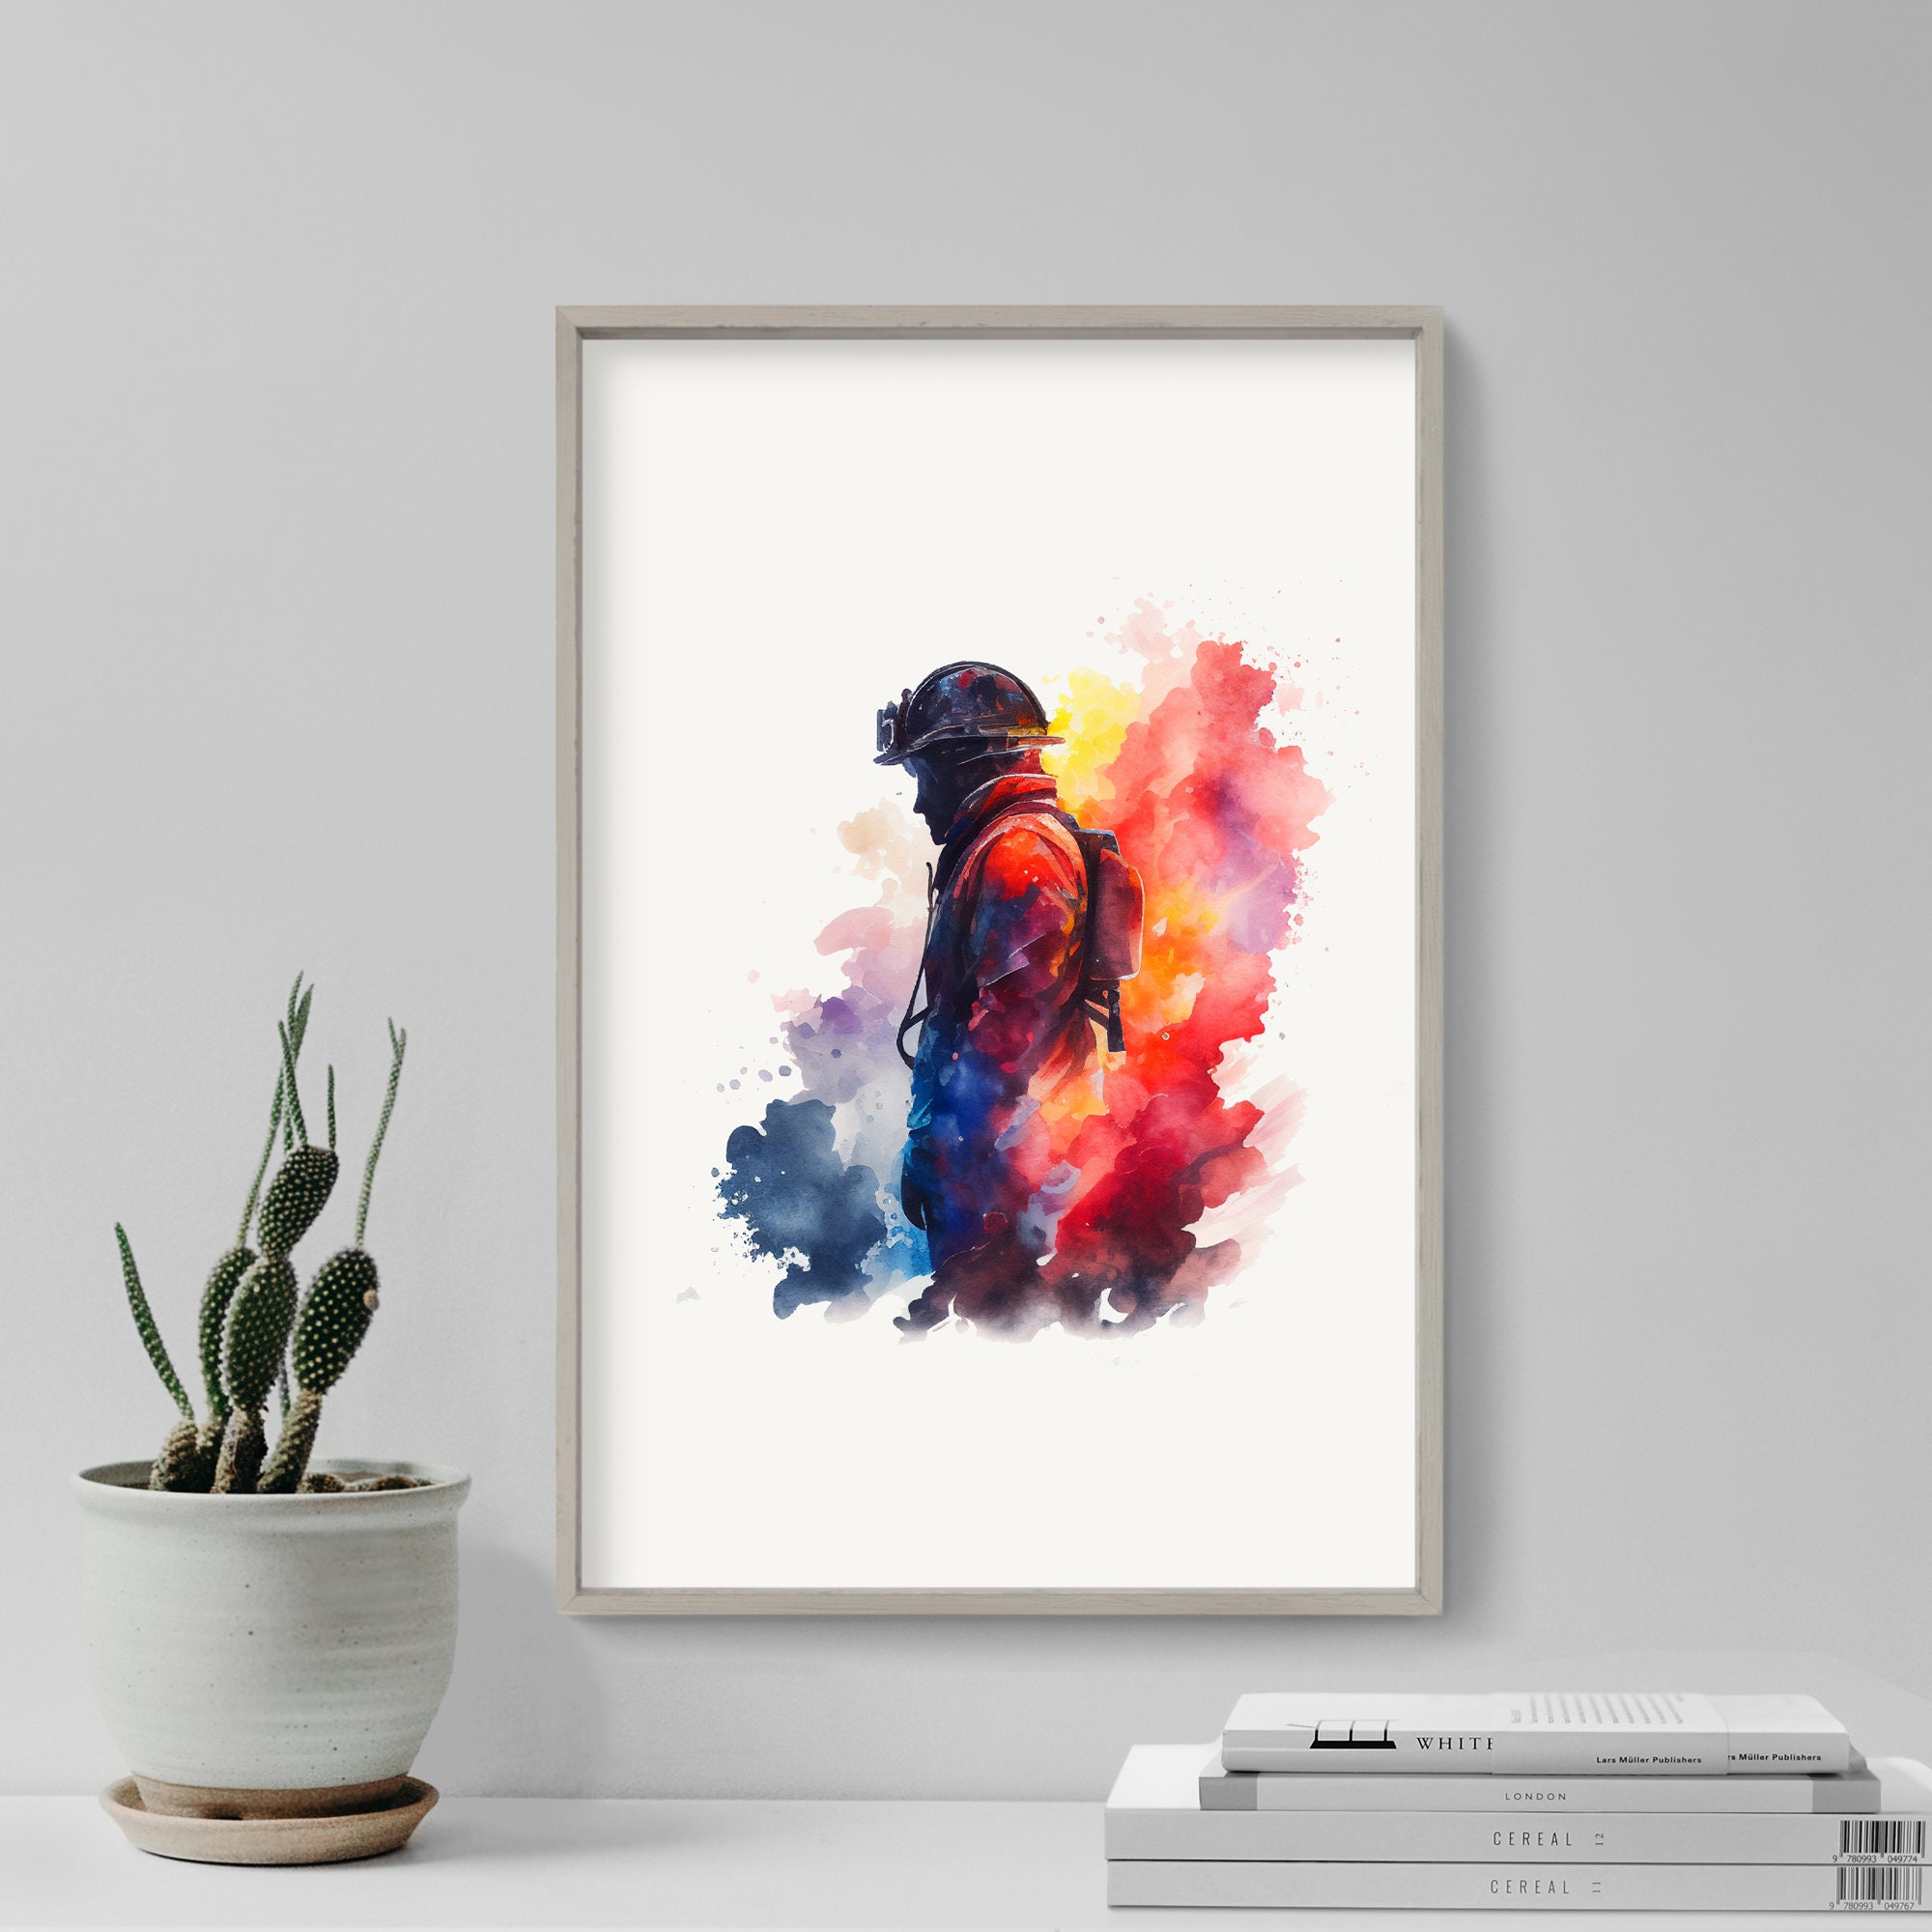 Discover Firefighter Watercolour - Art Print Poster - Colourful Paint Splashes - Gift Home Wall Dcor Giclee - Fire Fighter Fireman First Responder